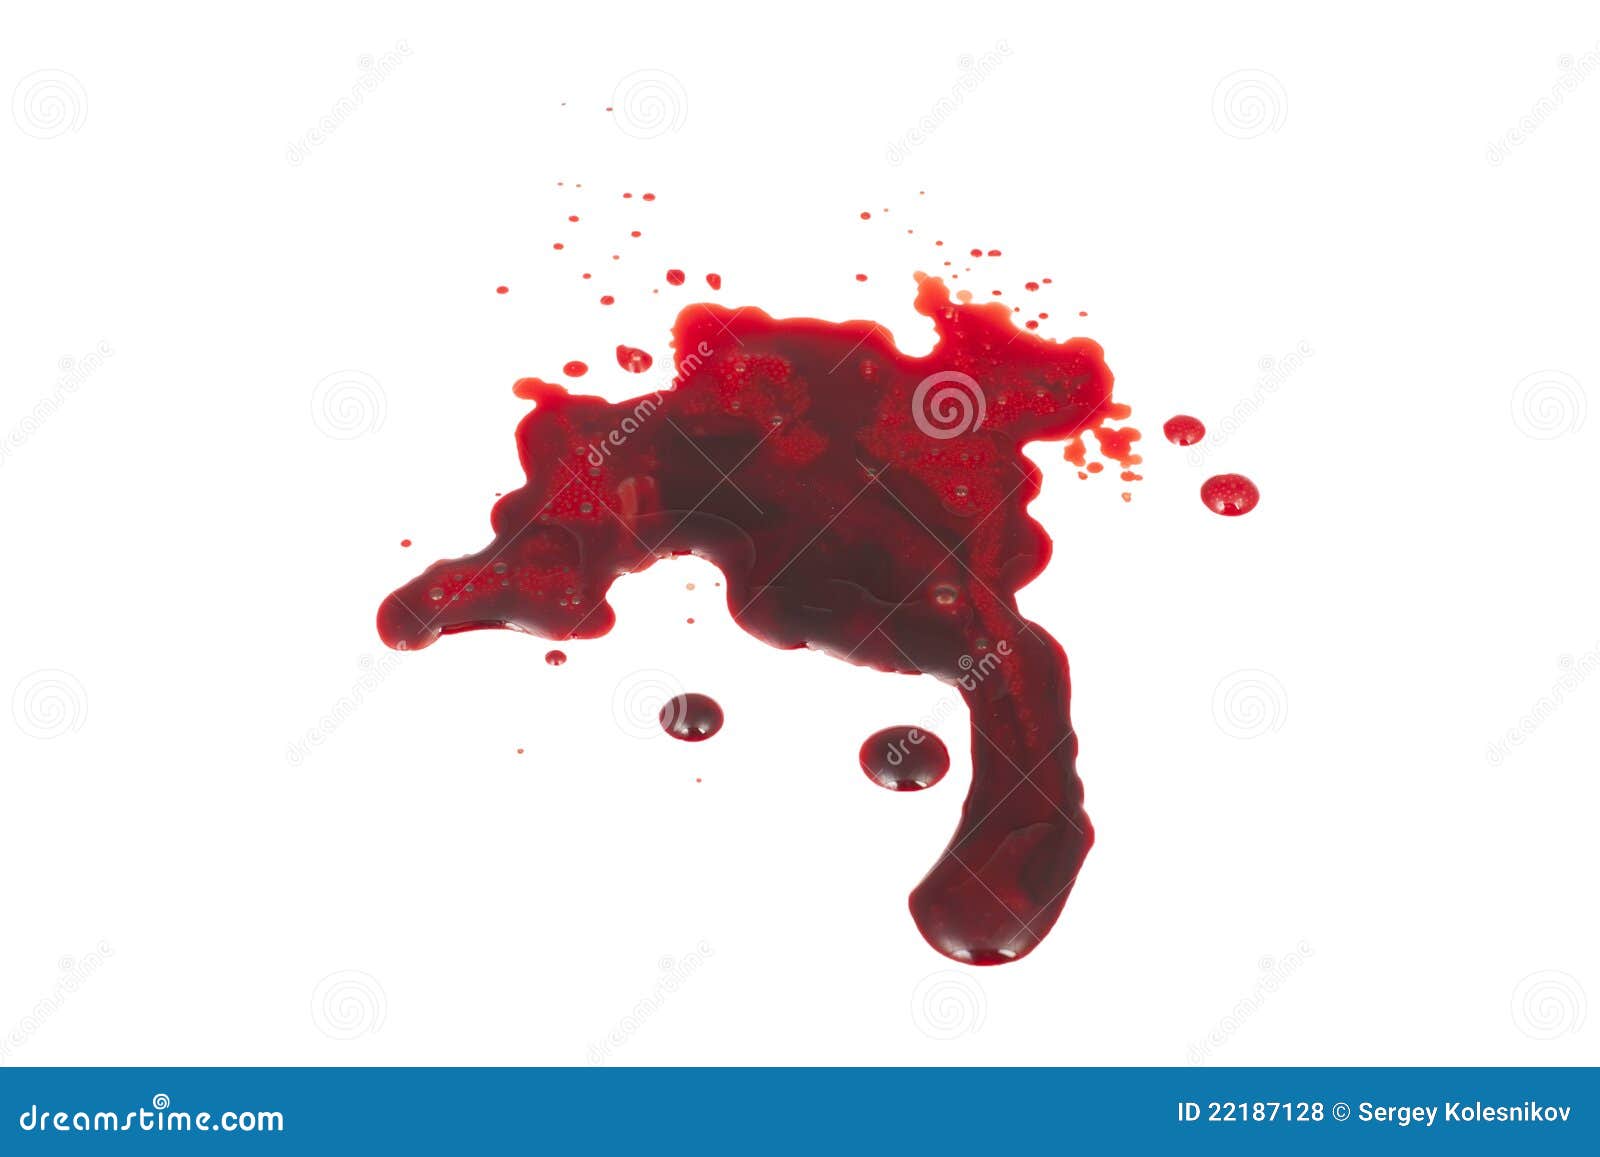 blood stain clipart - photo #15